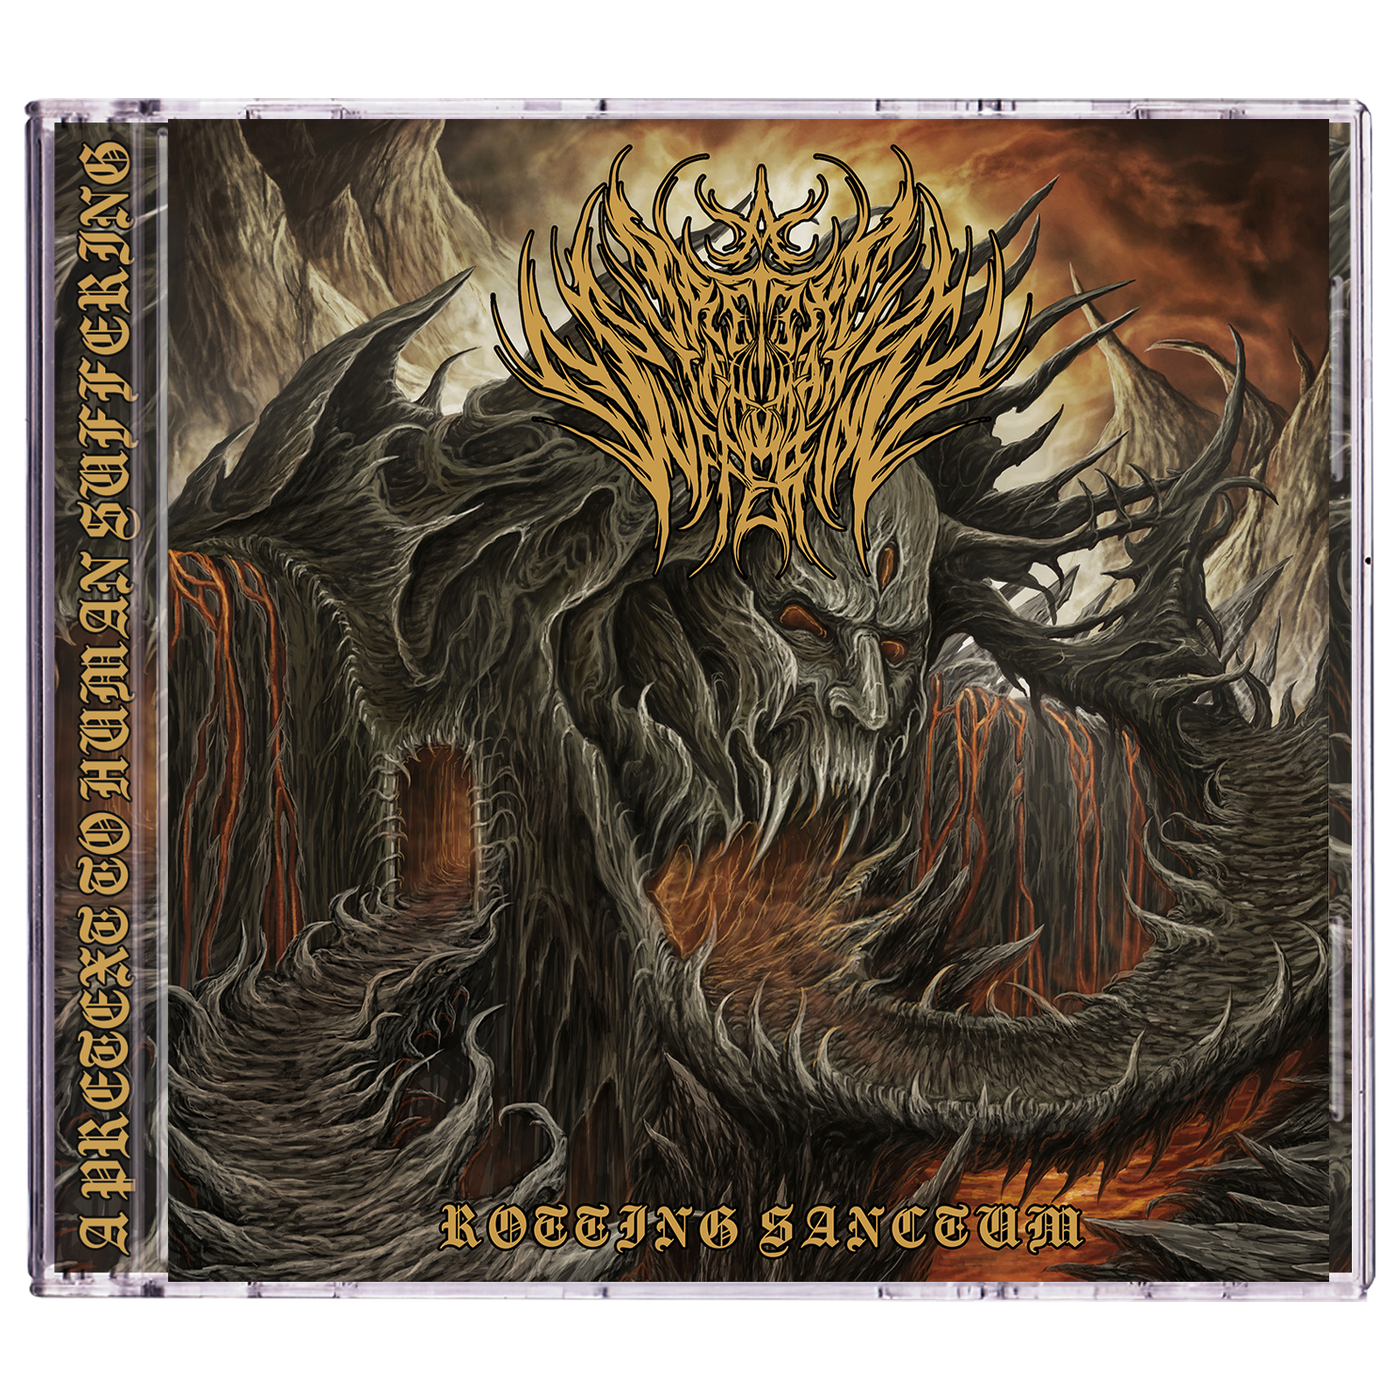 A Pretext To Human Suffering 'Rotting Sanctum' CD